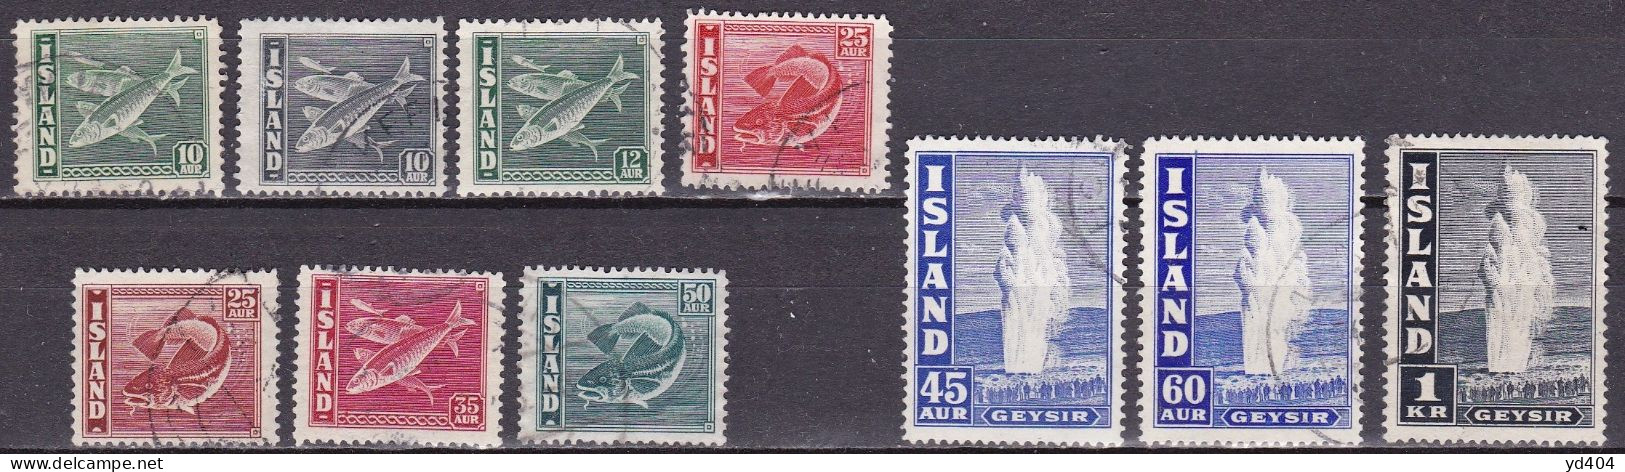 IS042 – ISLANDE – ICELAND – 1940-45 – FISHES & GEYSER – Y&T # 189/198a USED - Used Stamps